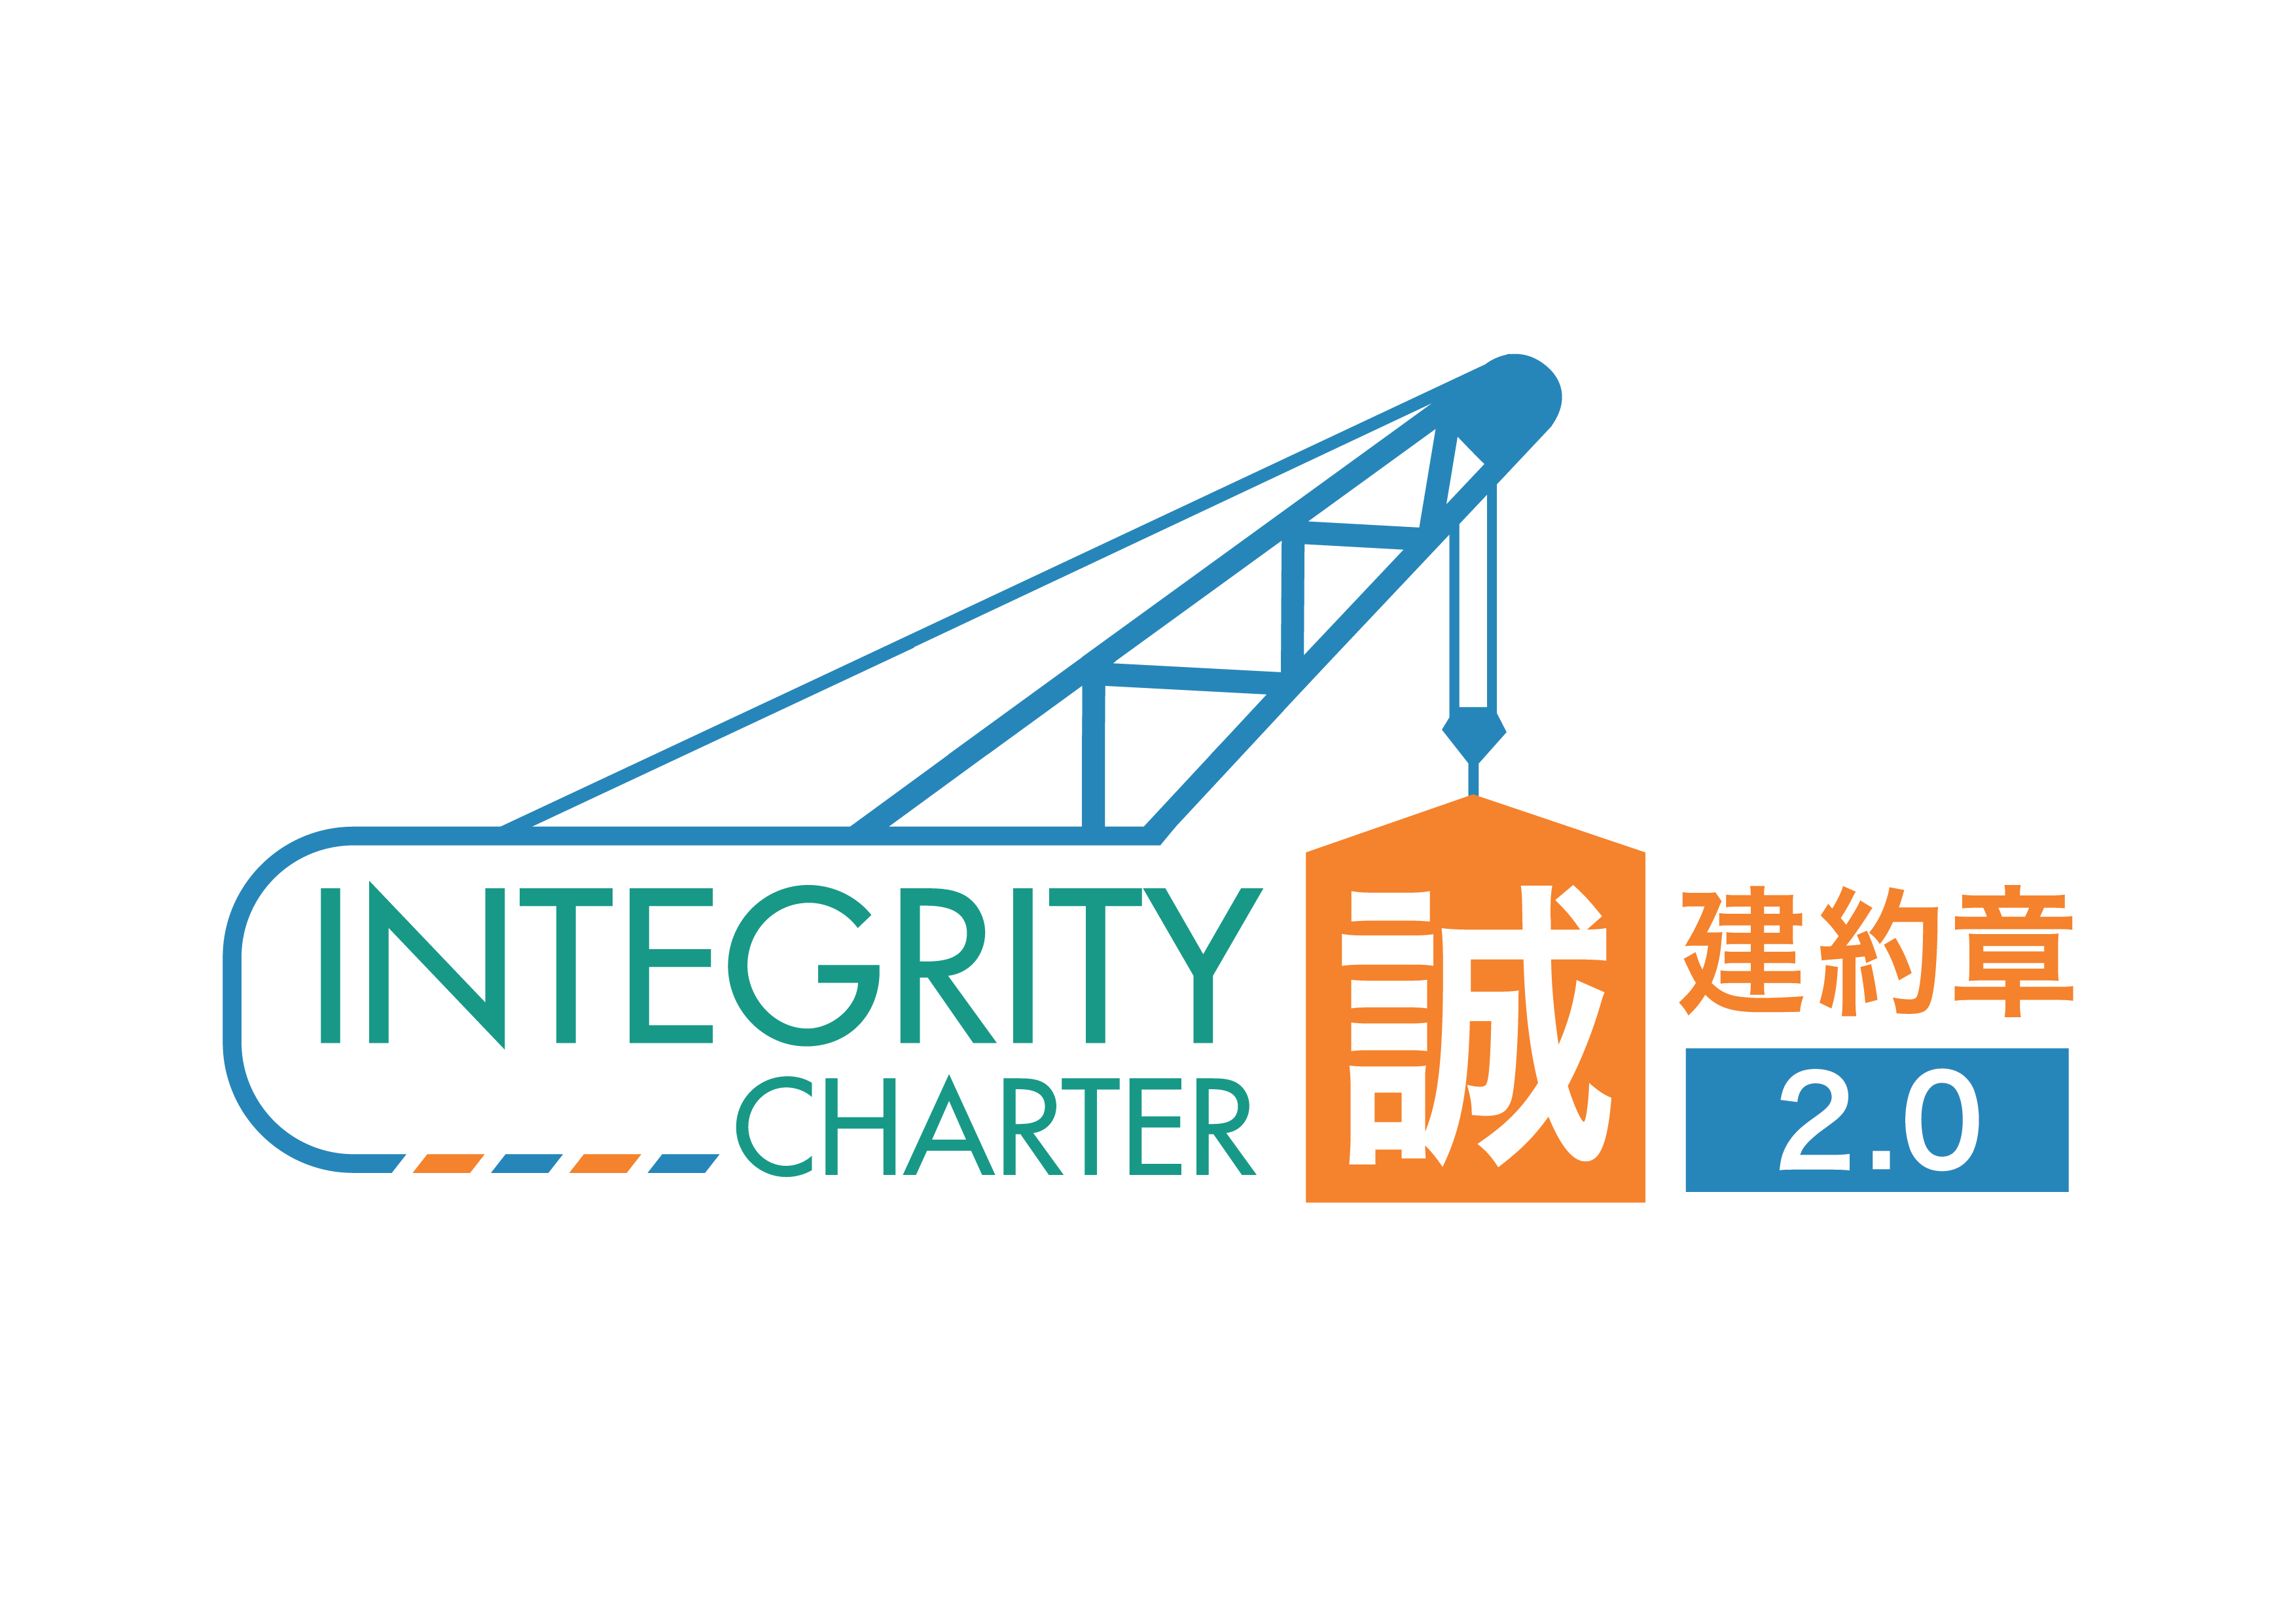 List of Construction Companies and Consulting Firms Subscribed to the Construction Industry Integrity Charter 2.0